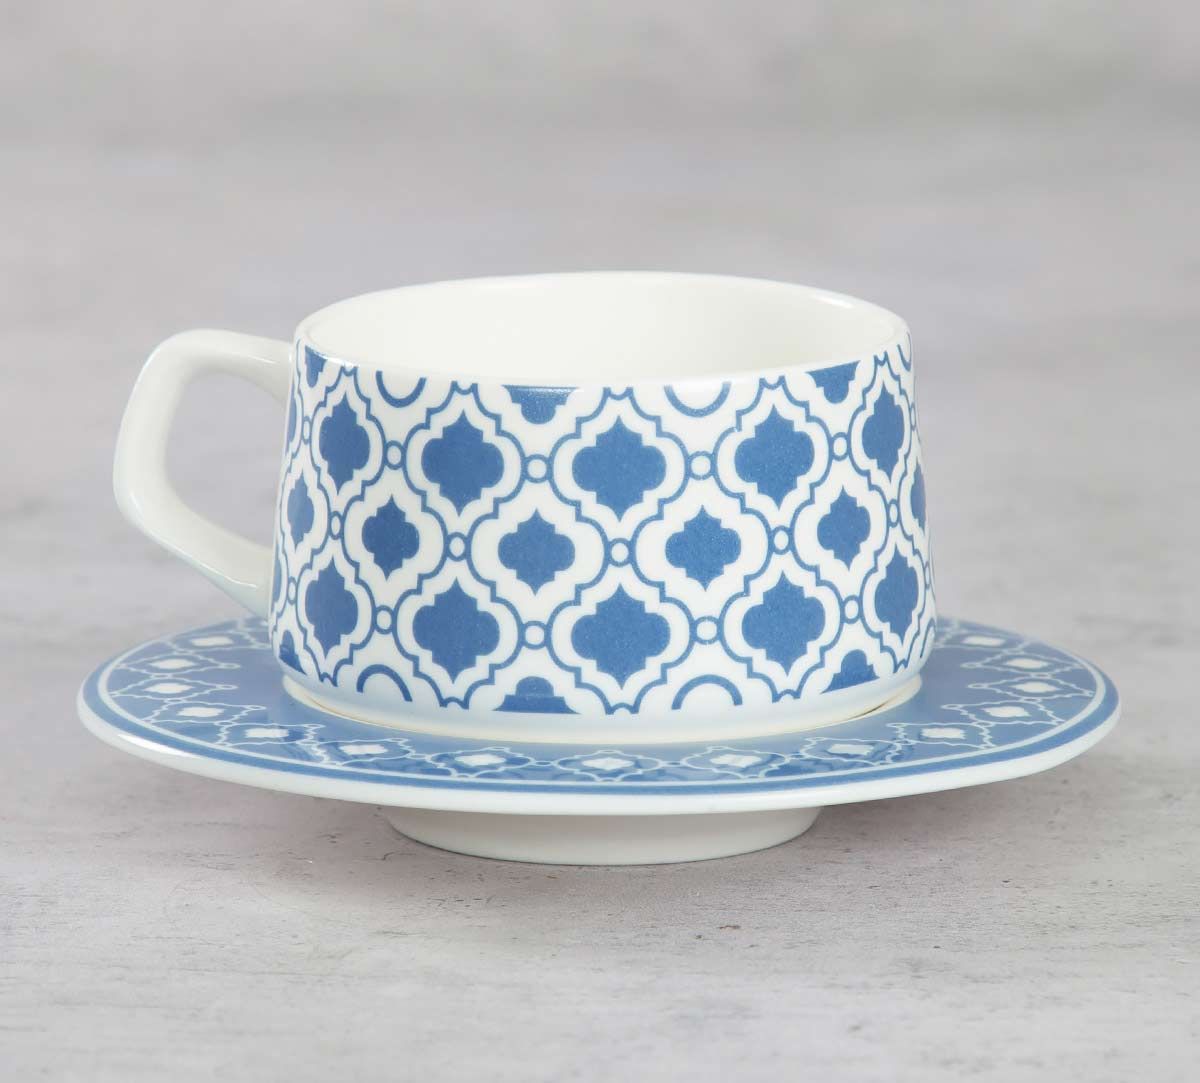 India Circus Lattice Fence Dining Extravaganza Cup and Saucer